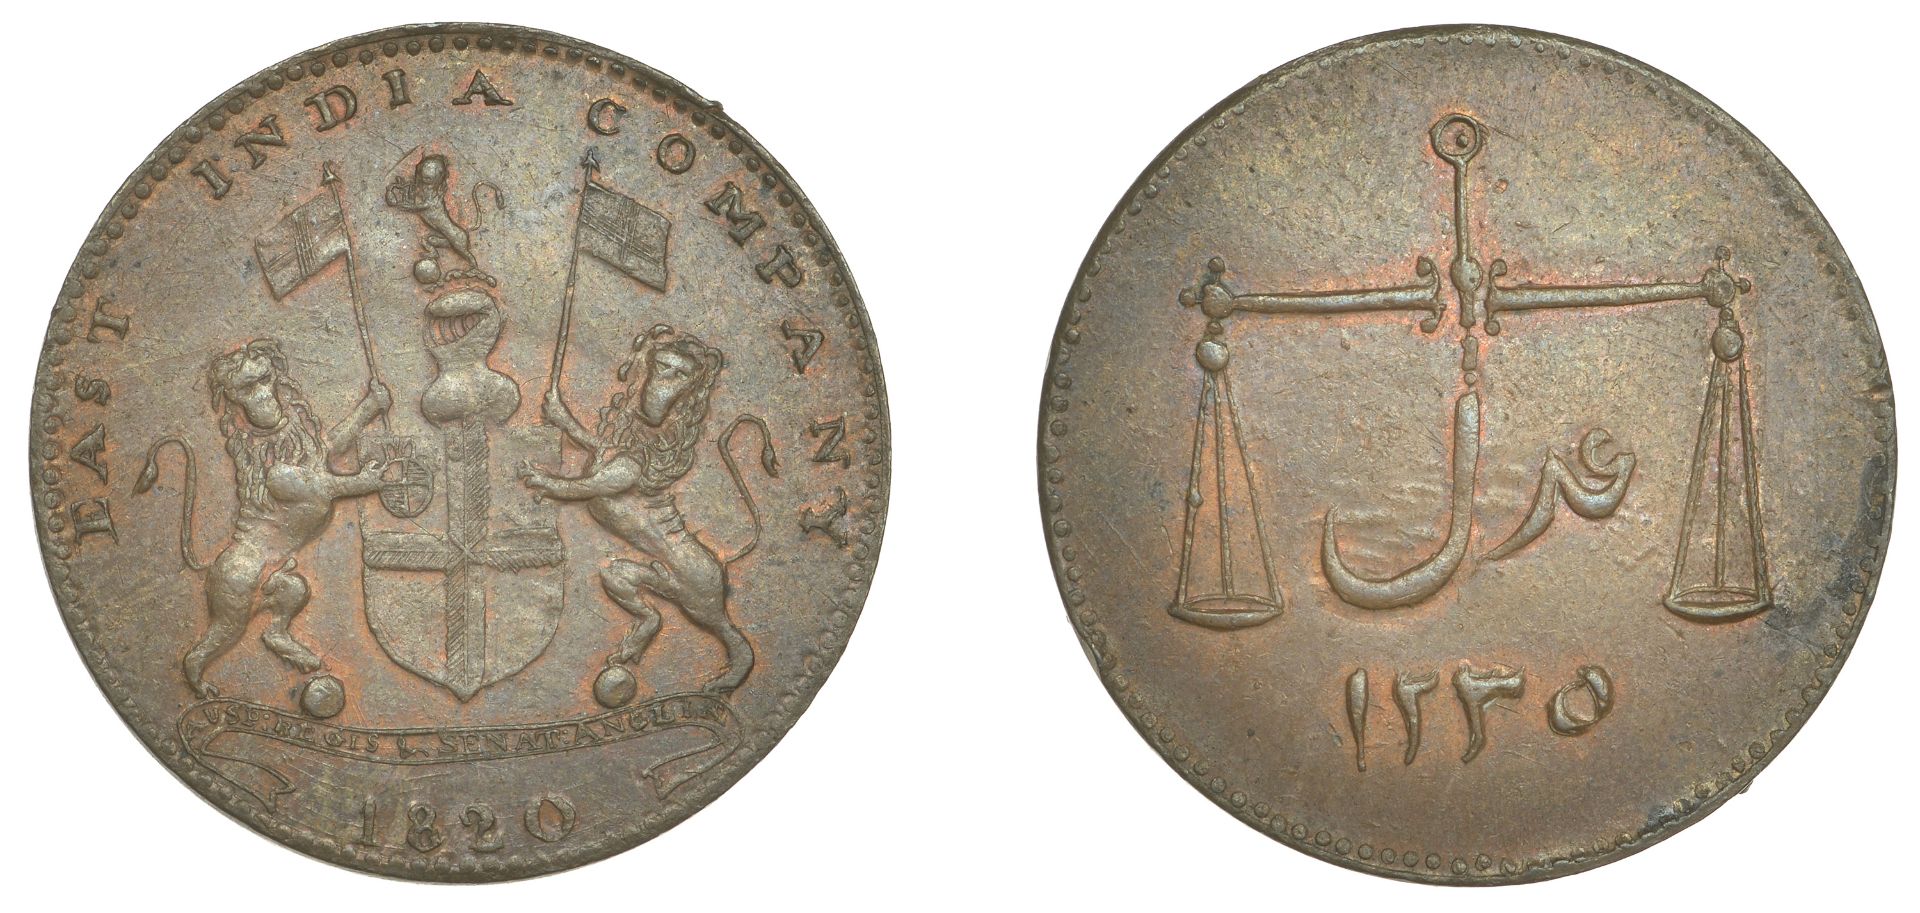 East India Company, Bombay Presidency, Later coinages: Stewart's machinery, copper Pattern Q...